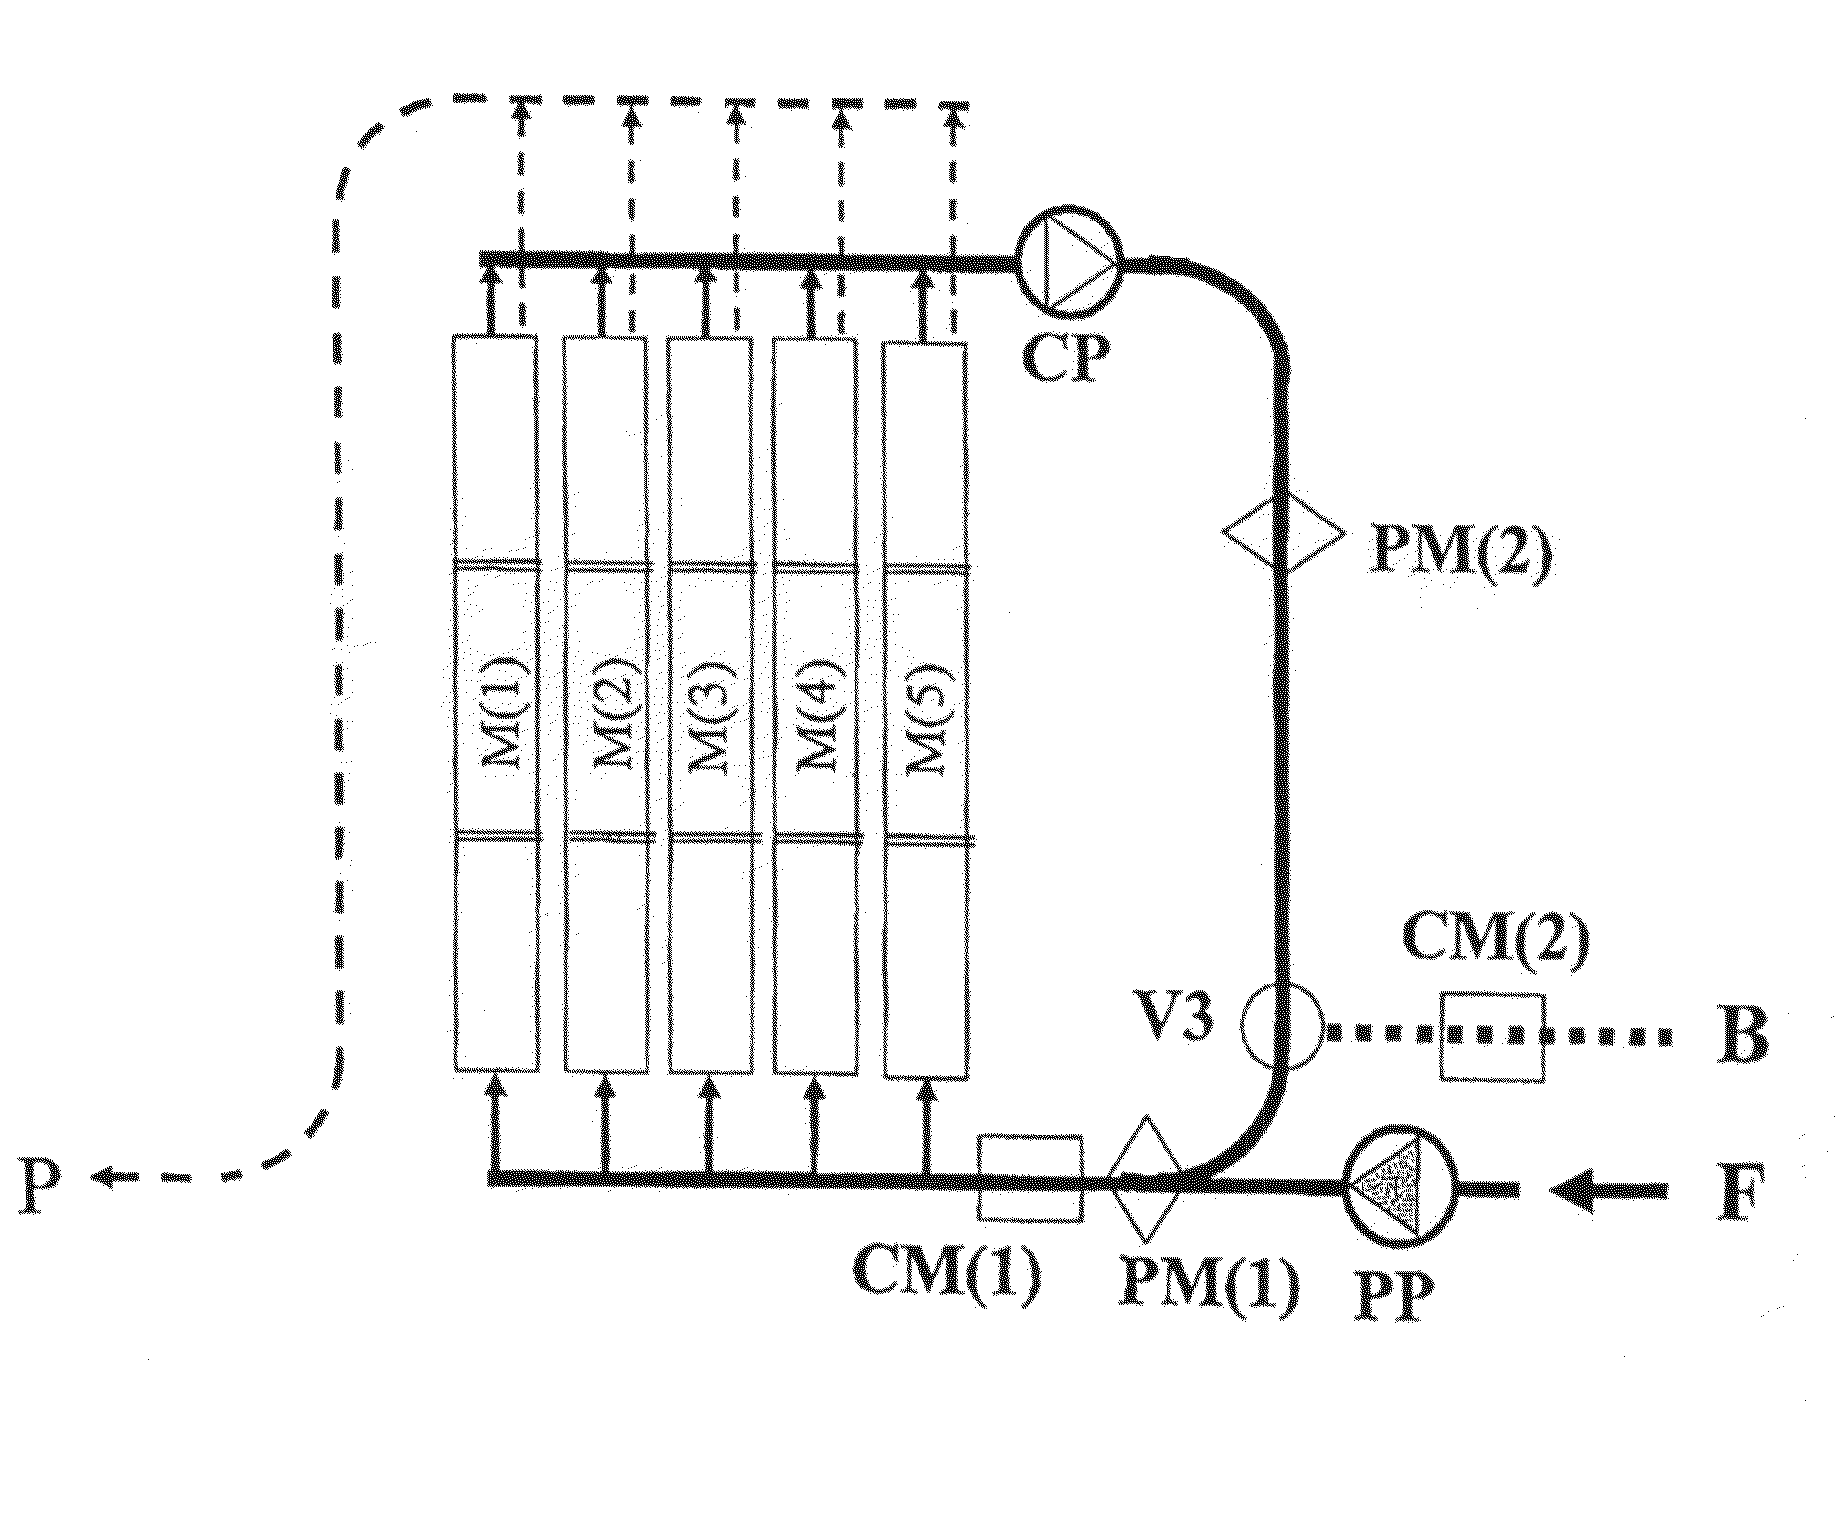 Continuous closed-circuit desalination method without containers